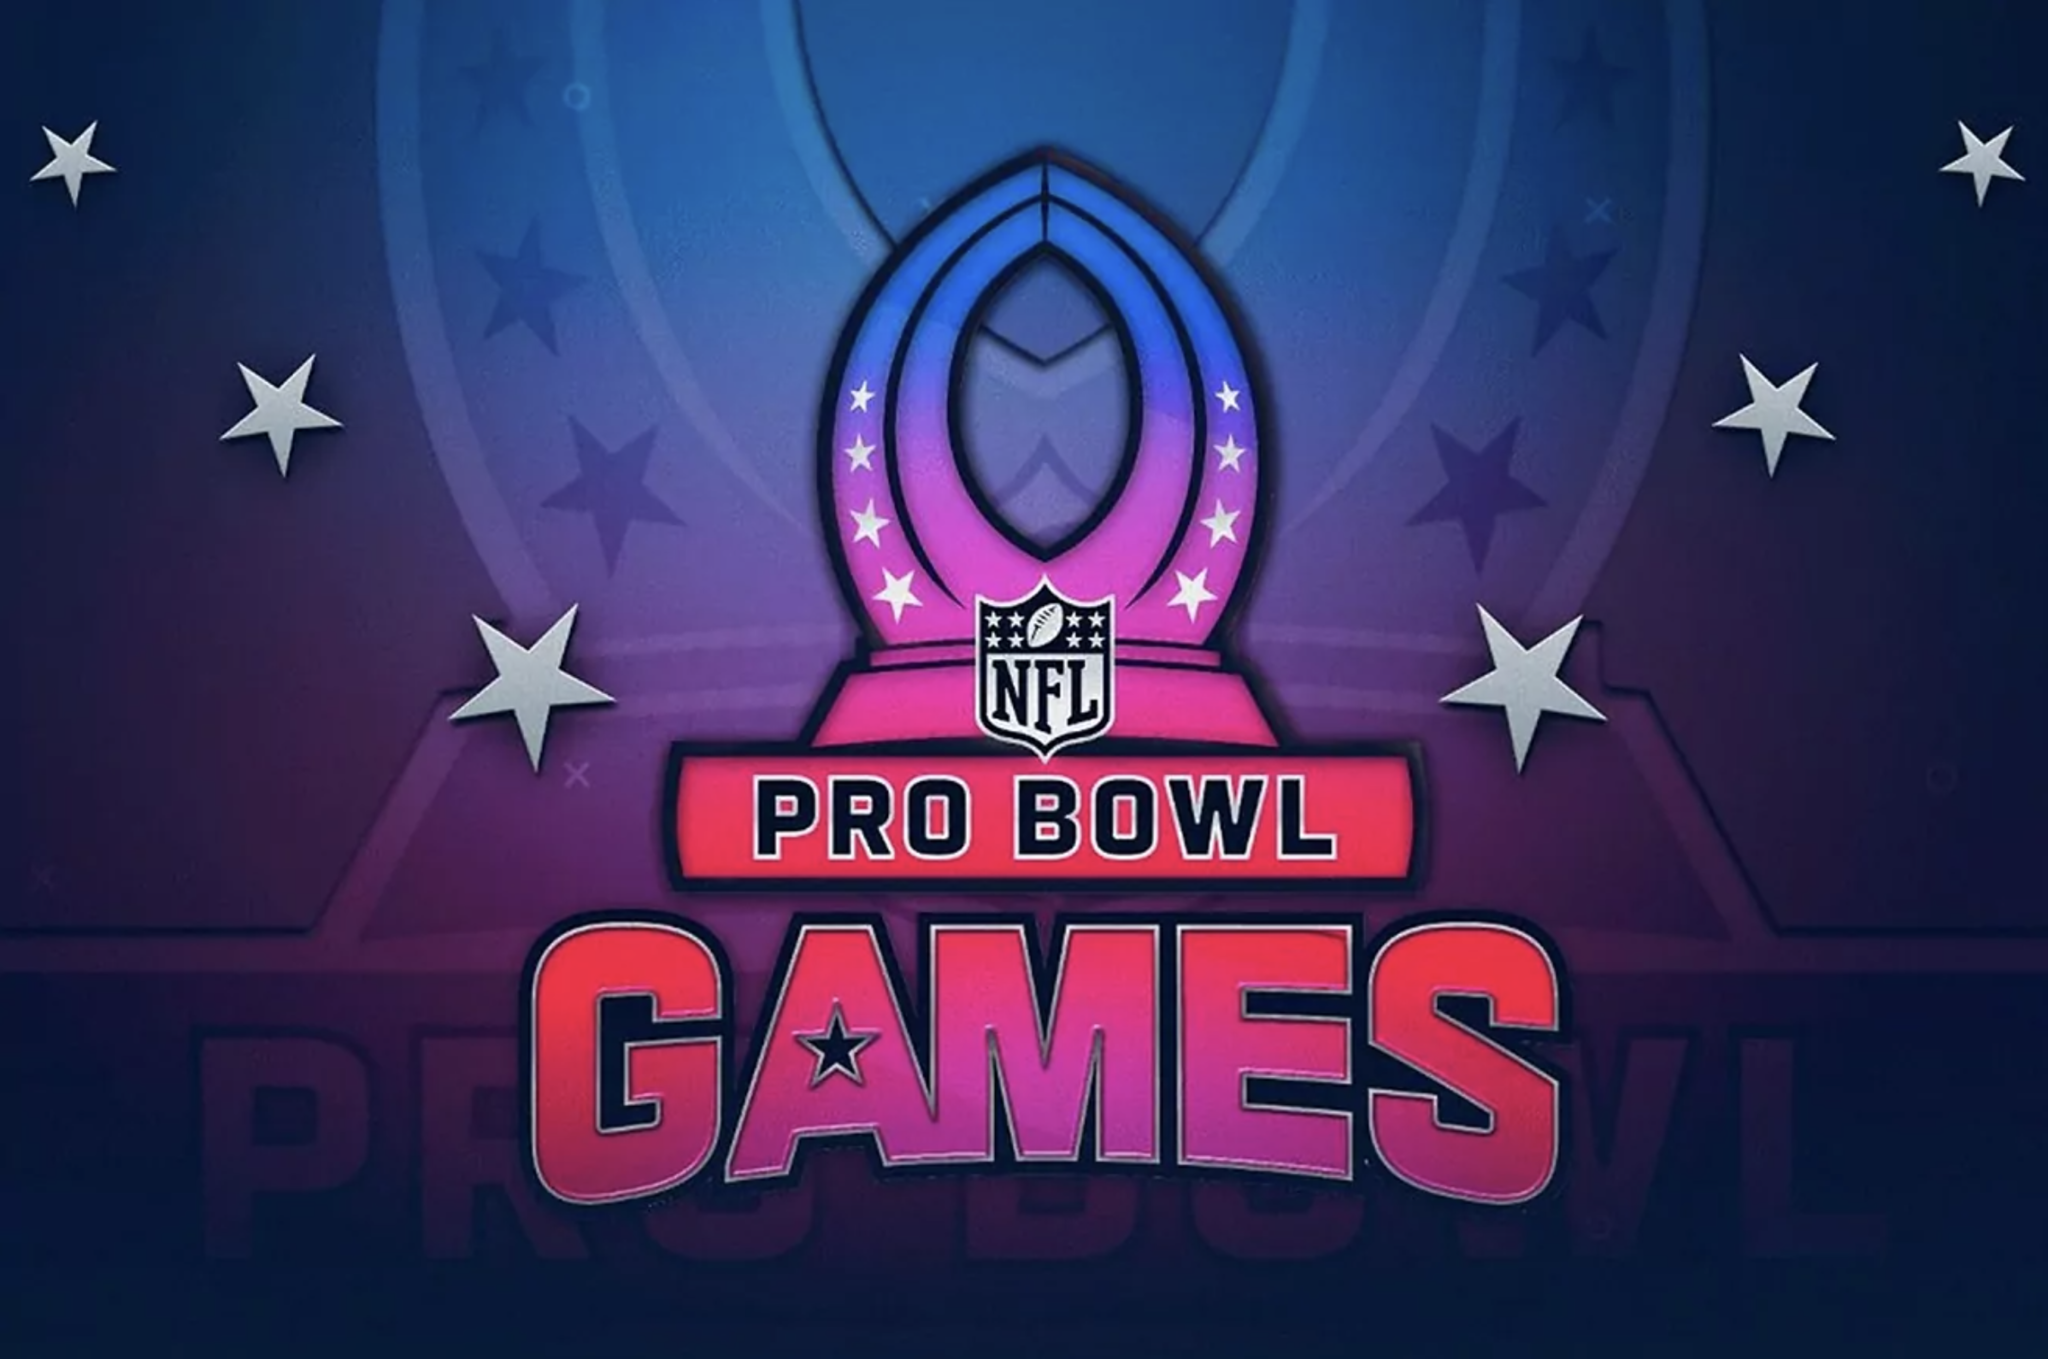 Pro Bowl, winners: Complete list of NFL Pro Bowl game results